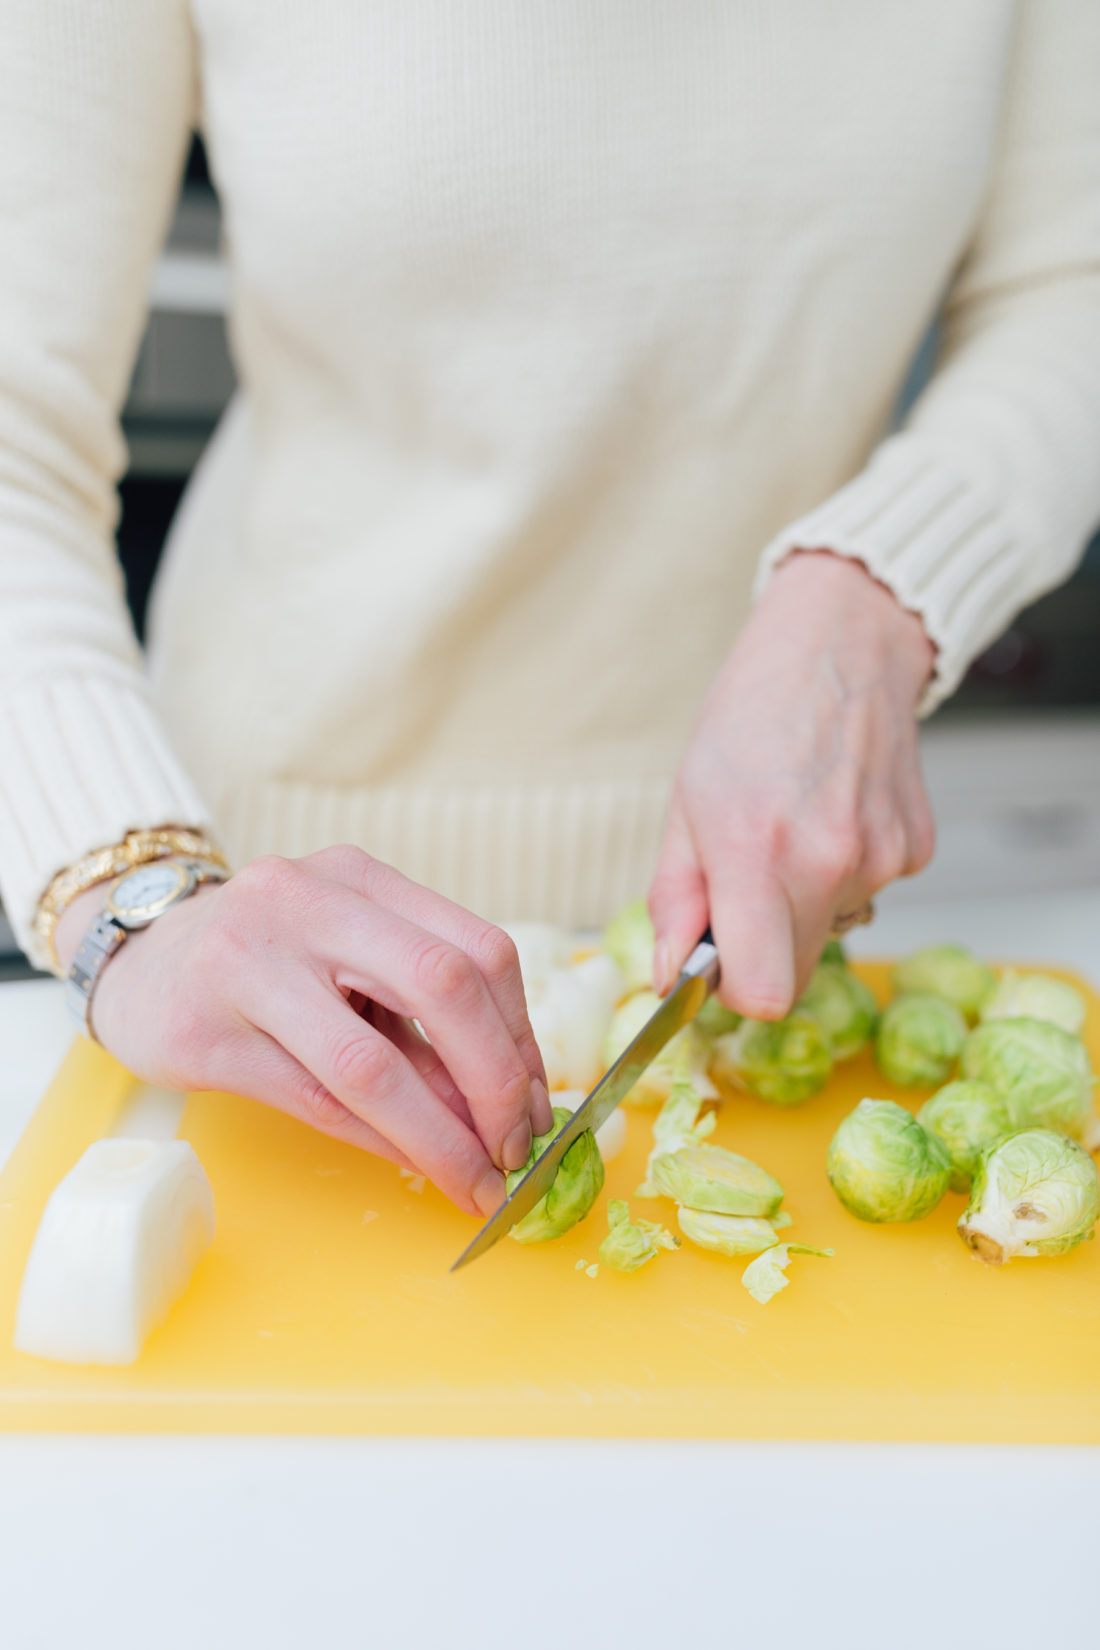 Eva Amurri Martino preps her Brussel Sprouts side dish in her kitchen in Connecticut